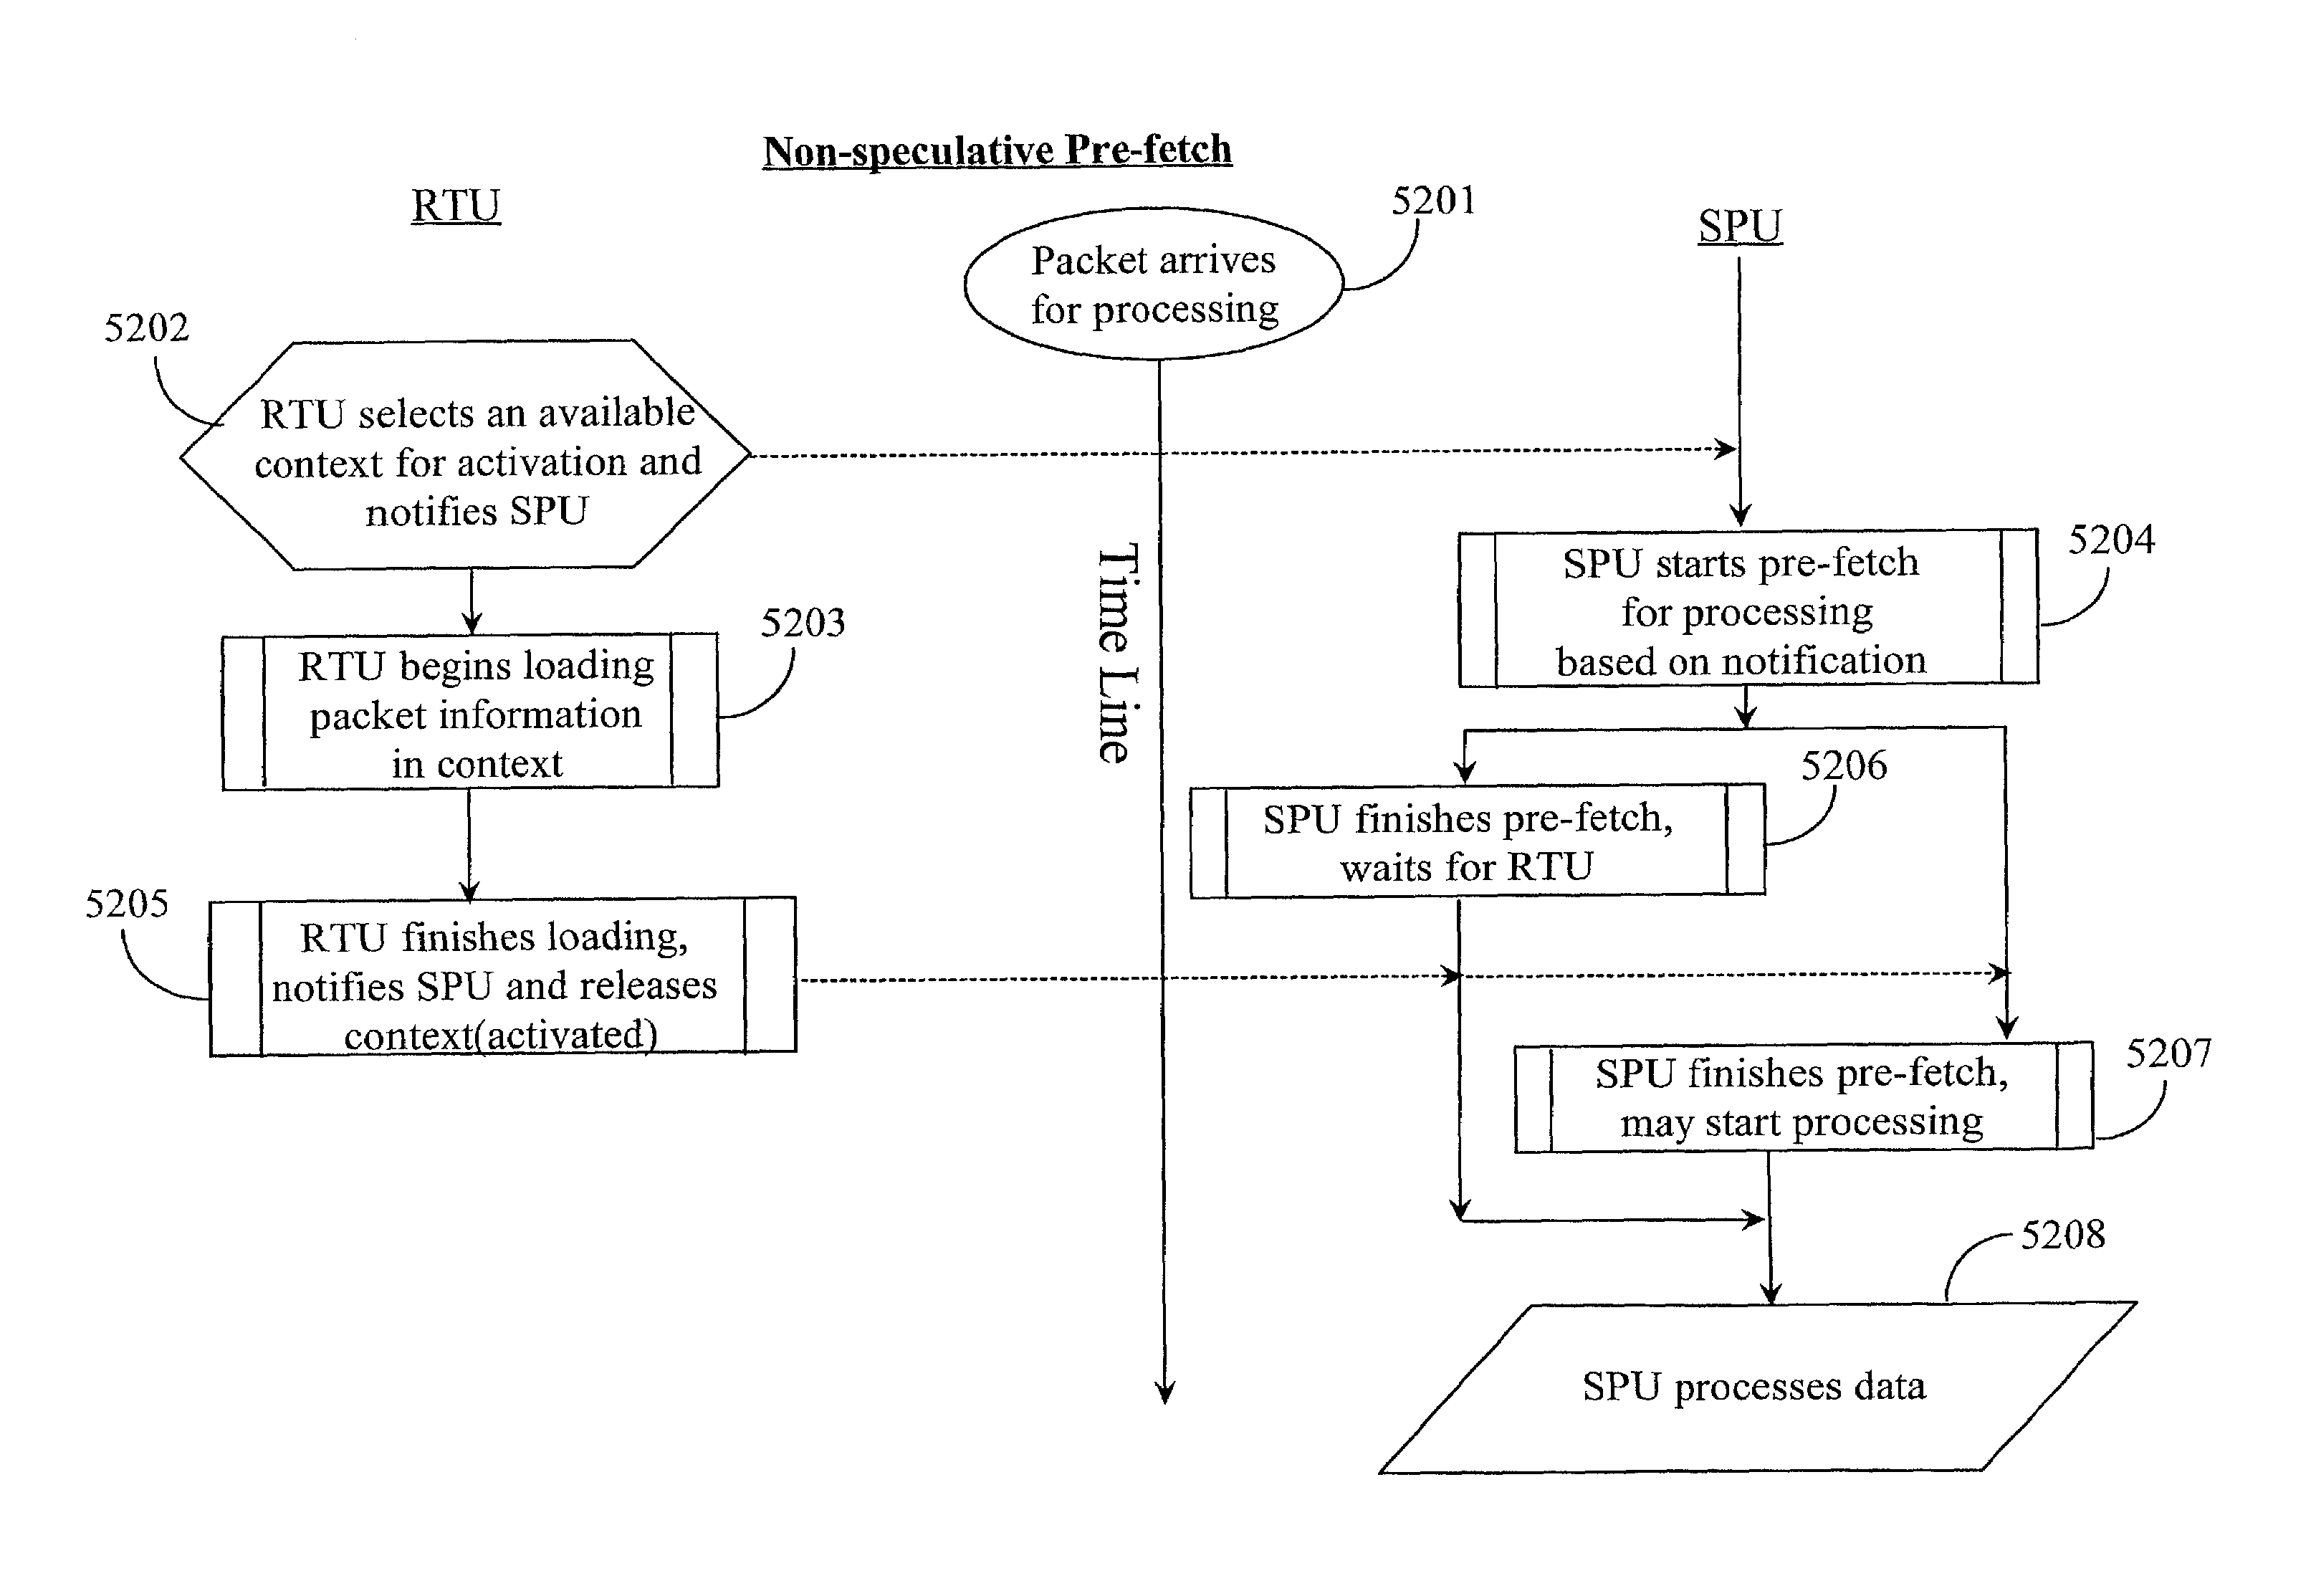 Method and apparatus for non-speculative pre-fetch operation in data packet processing